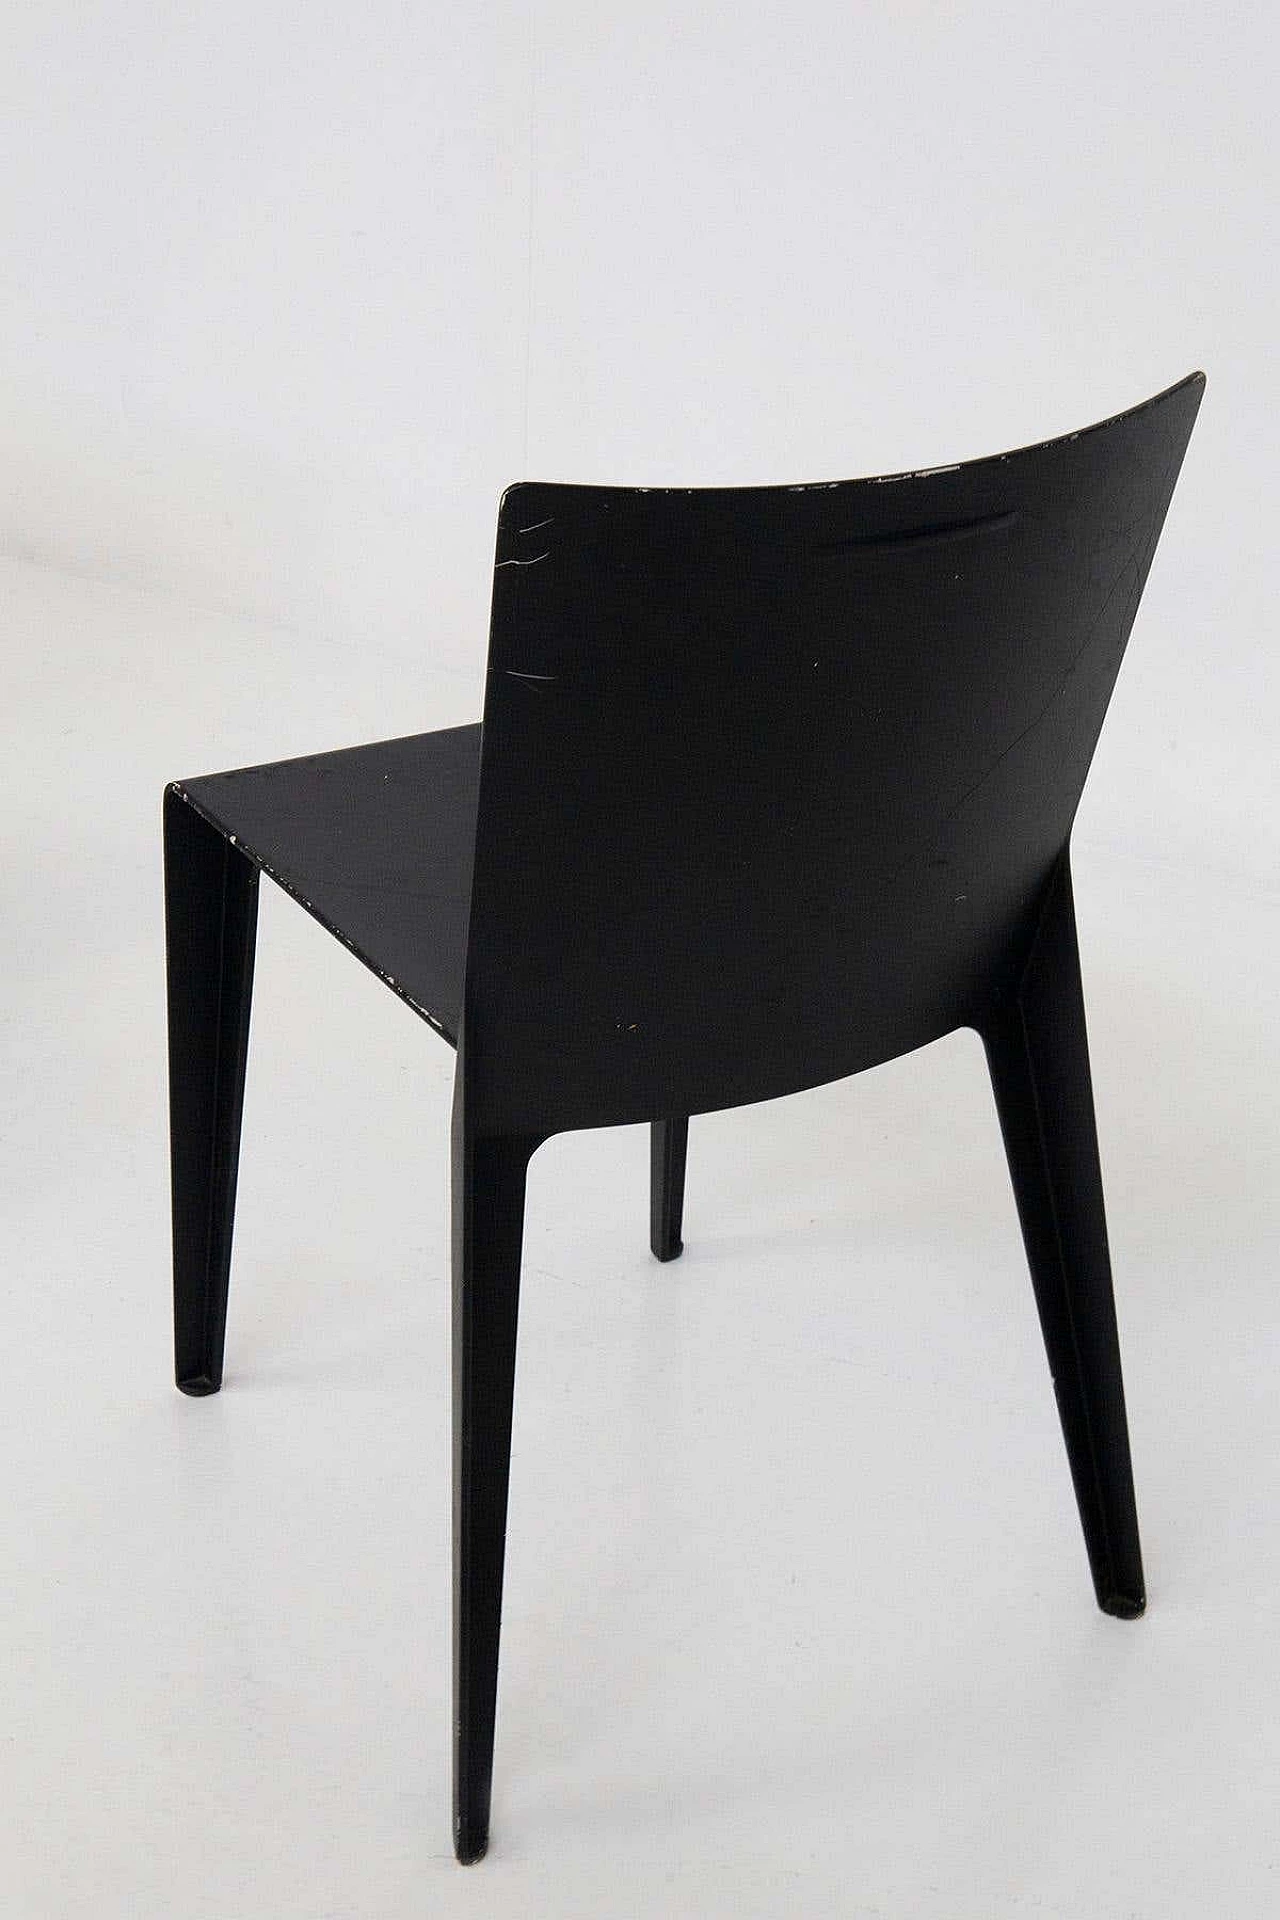 5 Alfa chairs by Hannes Wettstein for Molteni, 2001 6